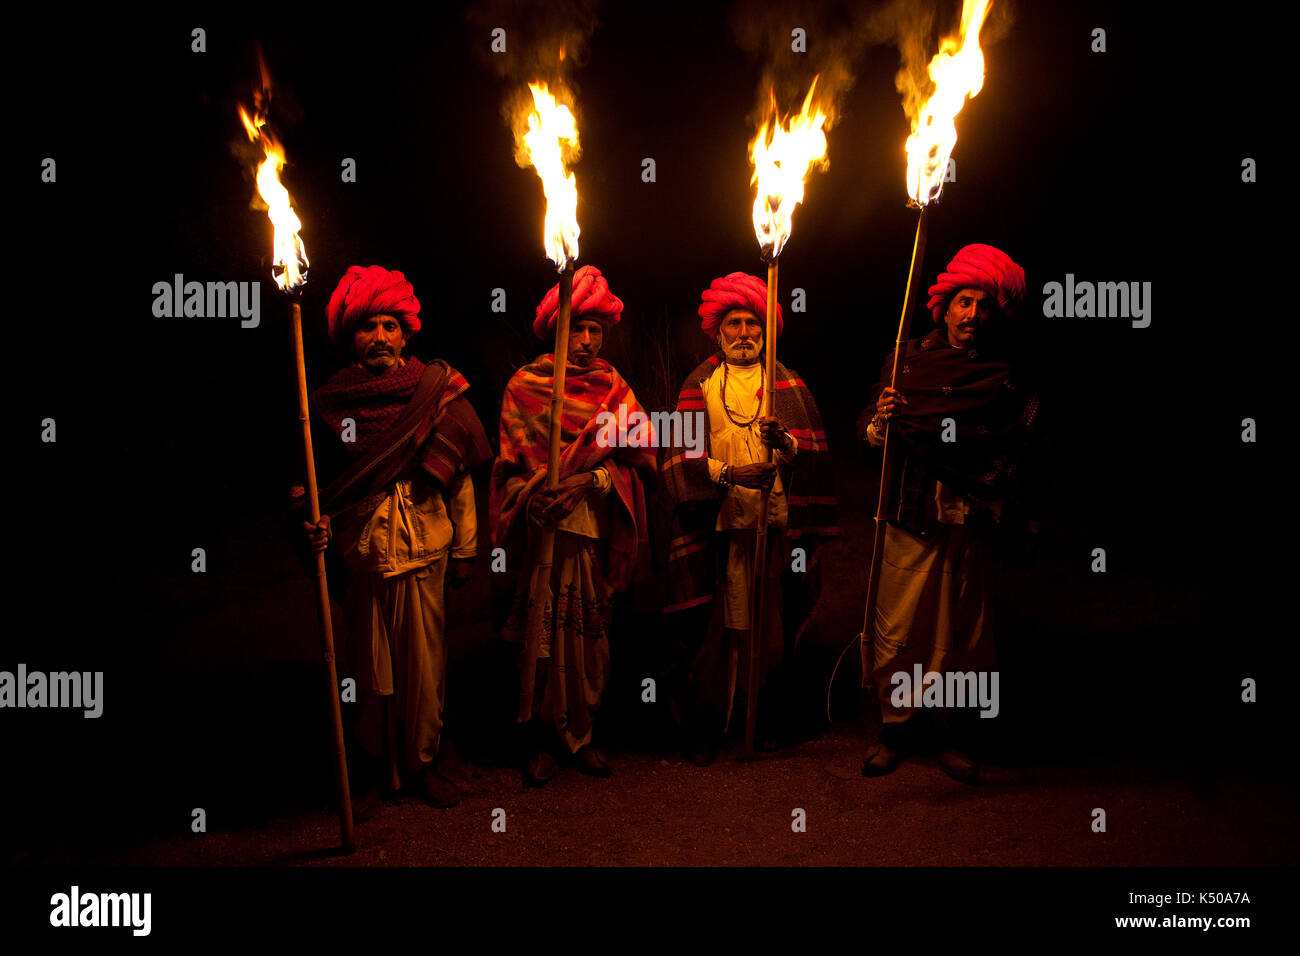 Rabari men holding wooden torches on new years eve Stock Photo